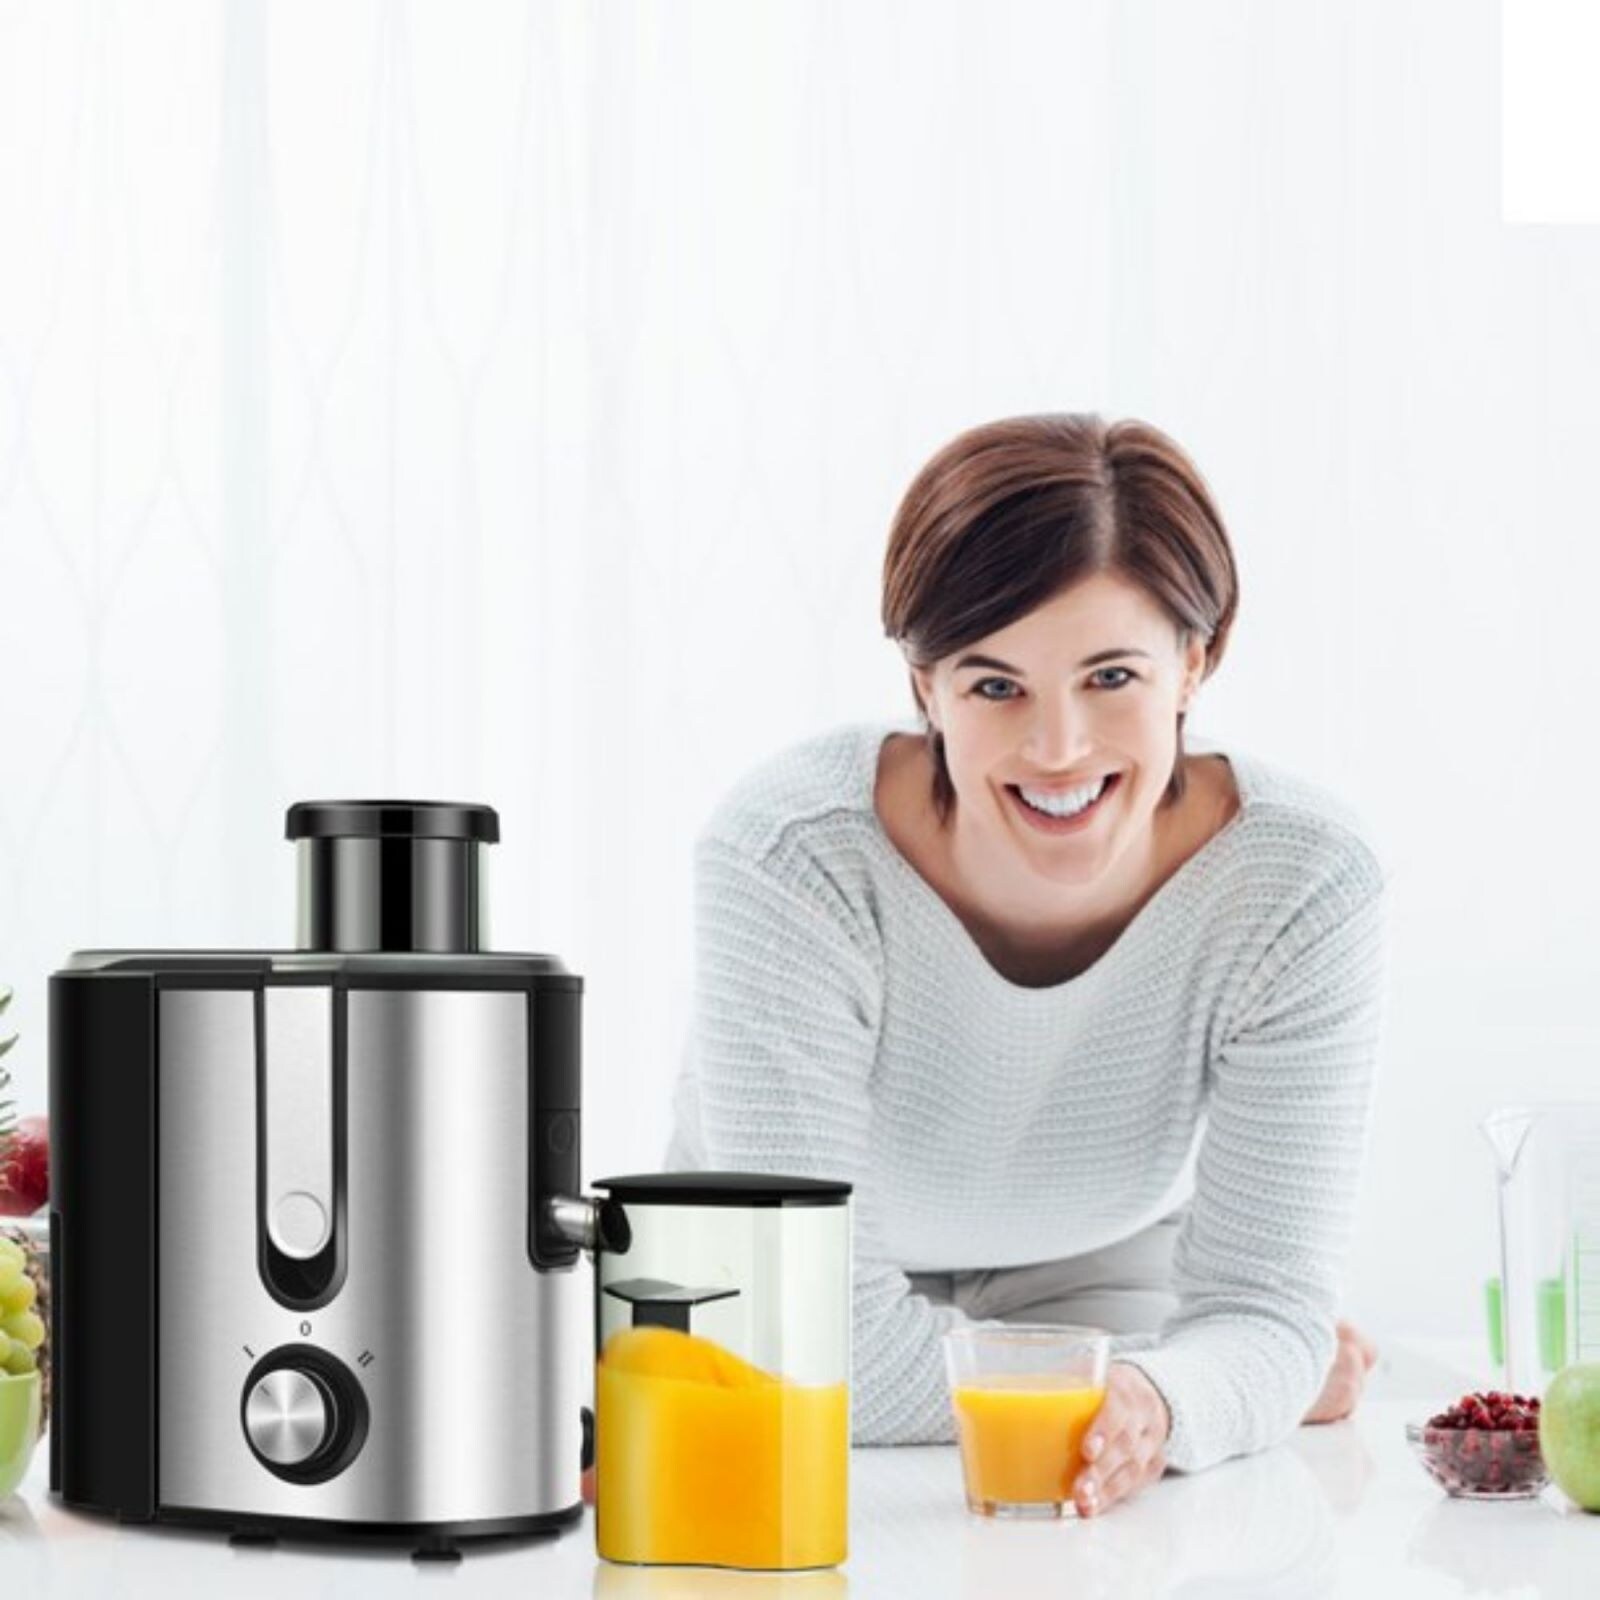 https://ak1.ostkcdn.com/images/products/is/images/direct/8fbd3685e3378e7073994f2a14ac561e9d17f036/Juicer-Extractor-Dual-Speed-w--2.5%27%27-Feed-Chute.jpg